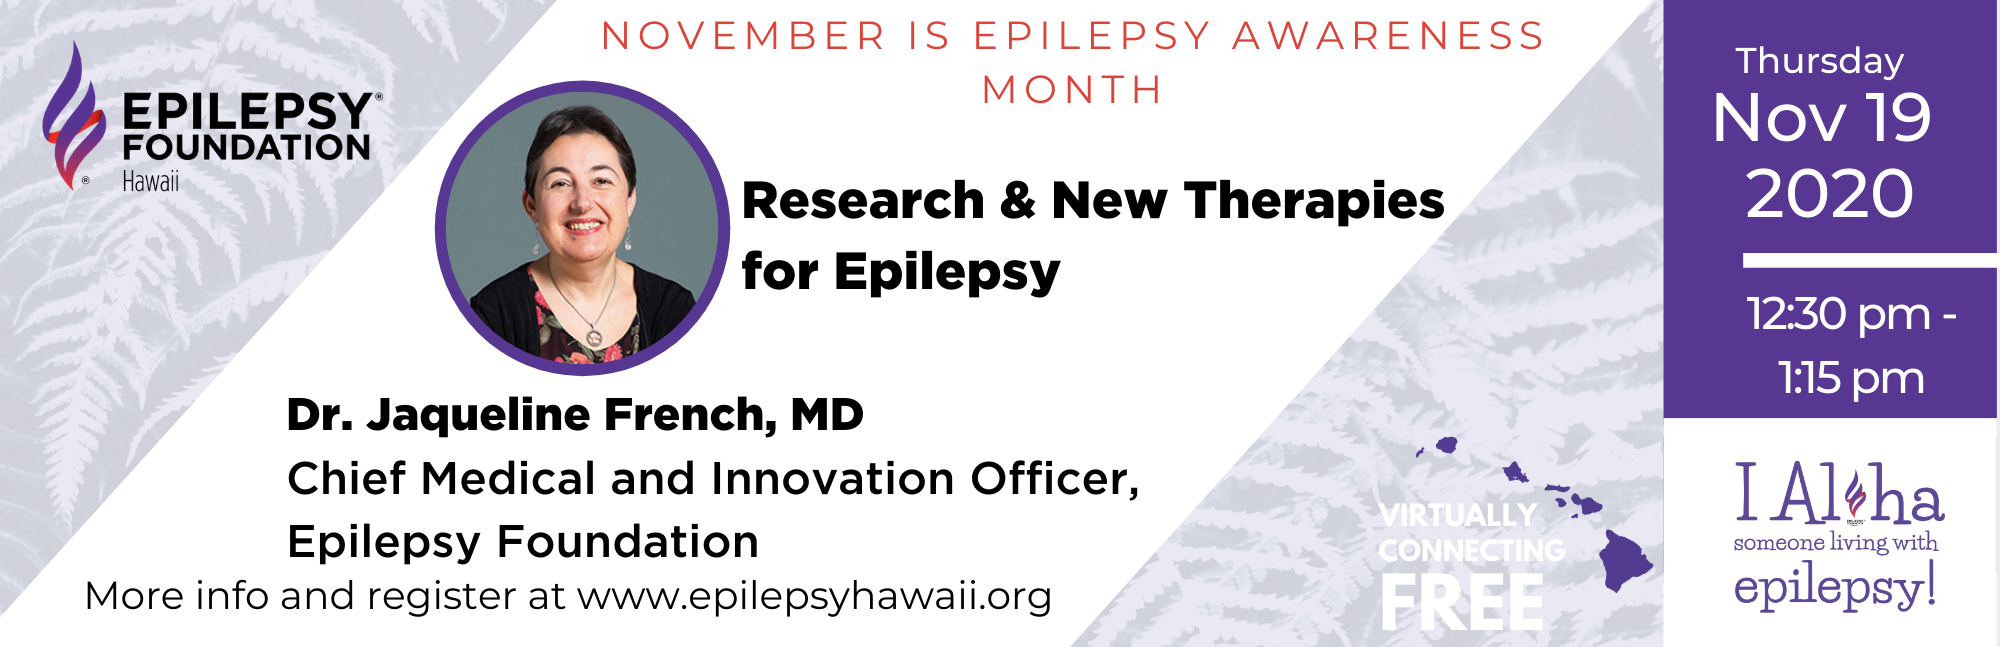 Research & New Therapies for Epilepsy